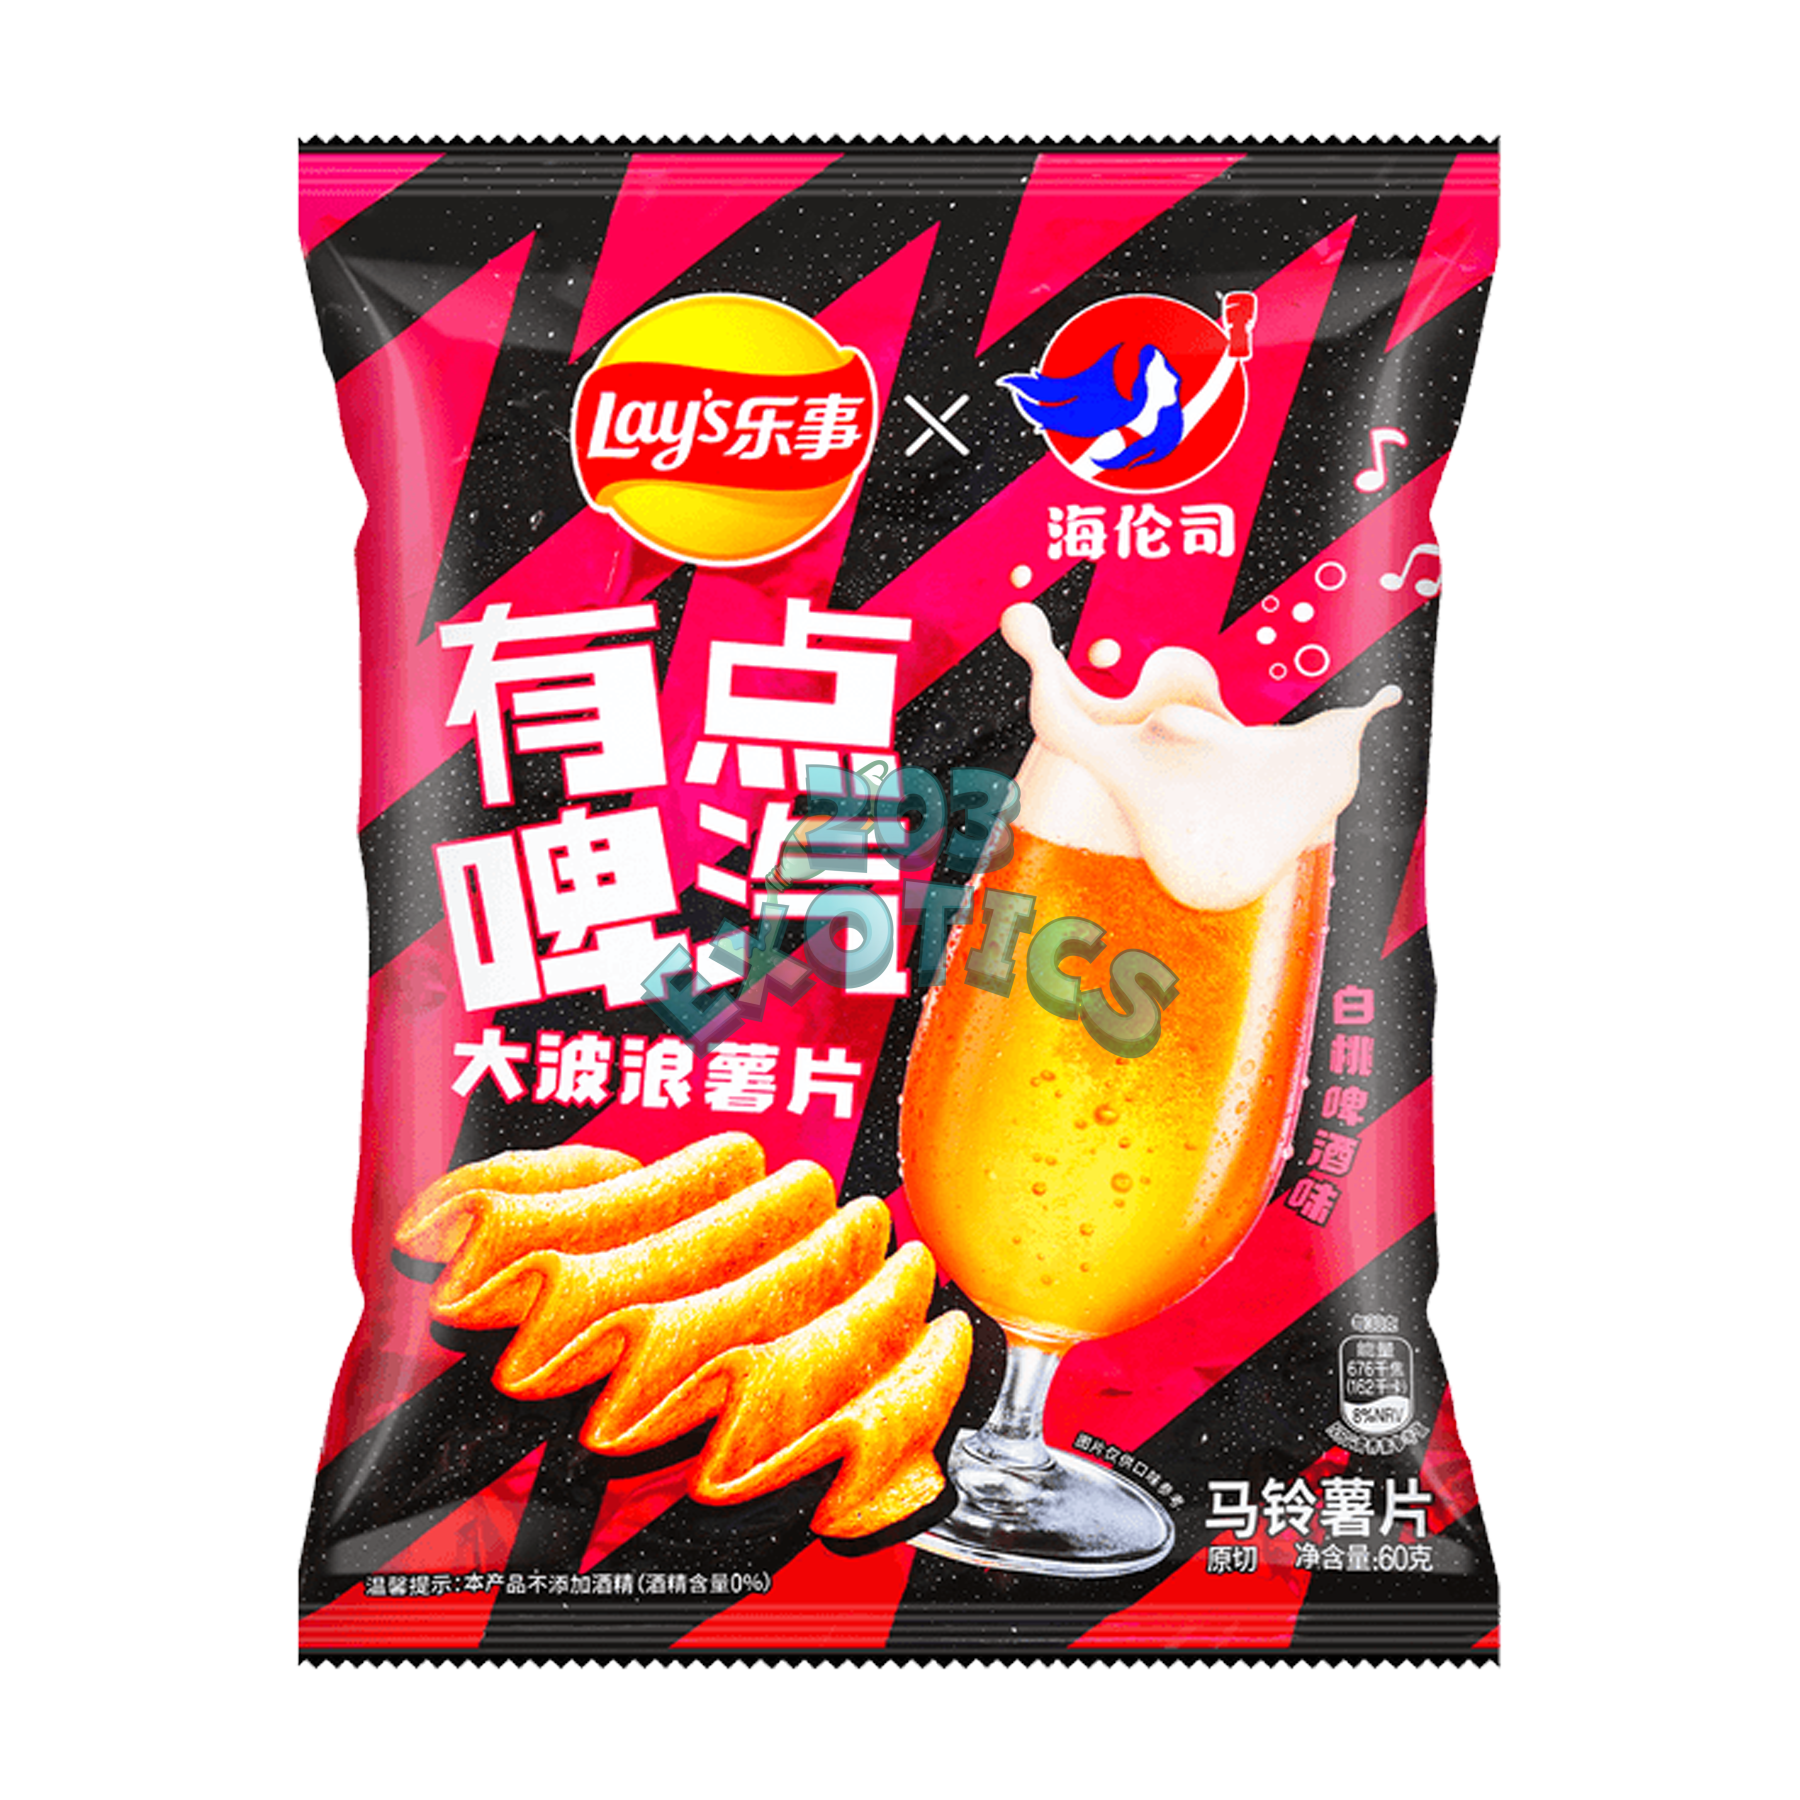 Lays White Peach Beer Flavored Wavy Chips (60G)